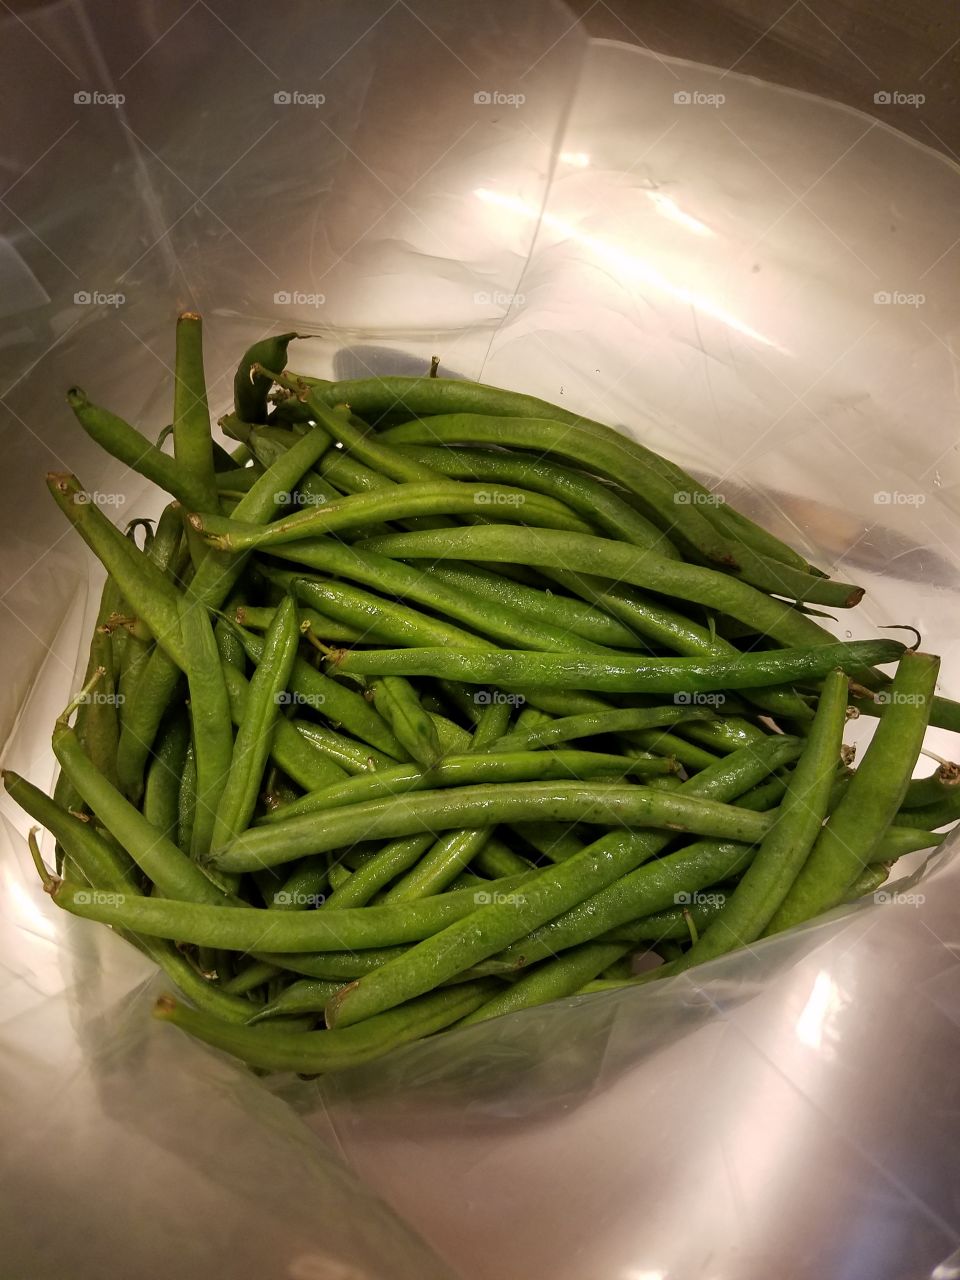 snapping beans